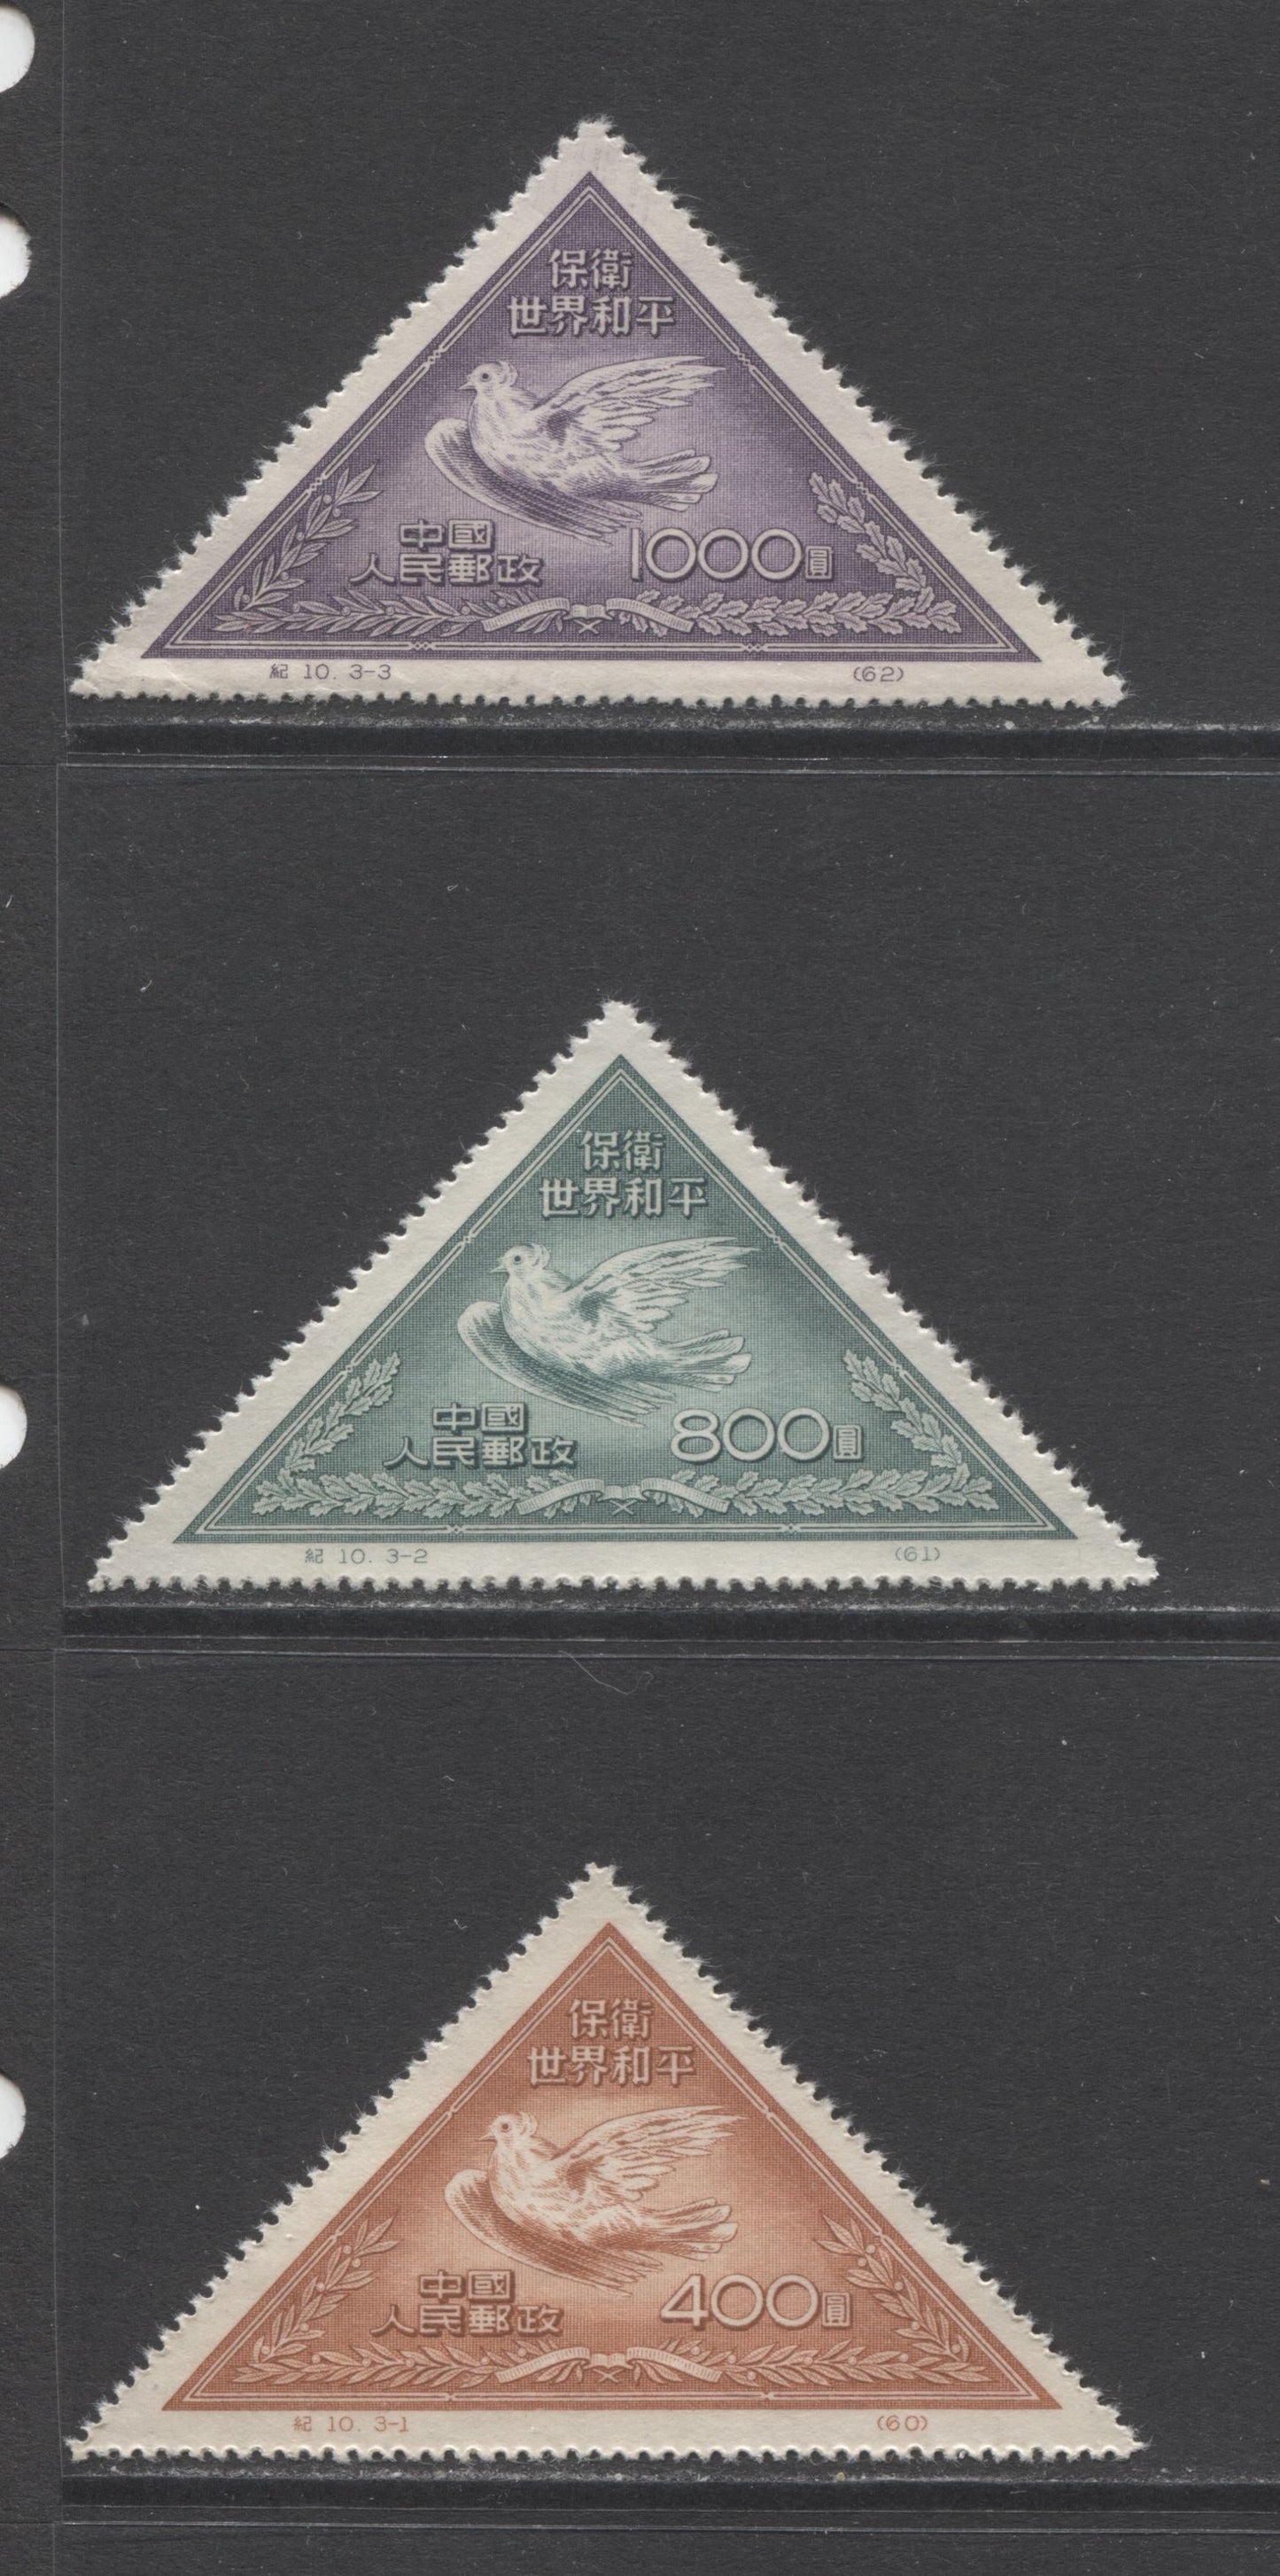 Lot A People's Republic of China SC#108-110 1951 Picasso Dove Issue, A VF unused Range Of Singles, 2017 Scott Cat. $30 USD, Click on Listing to See ALL Pictures